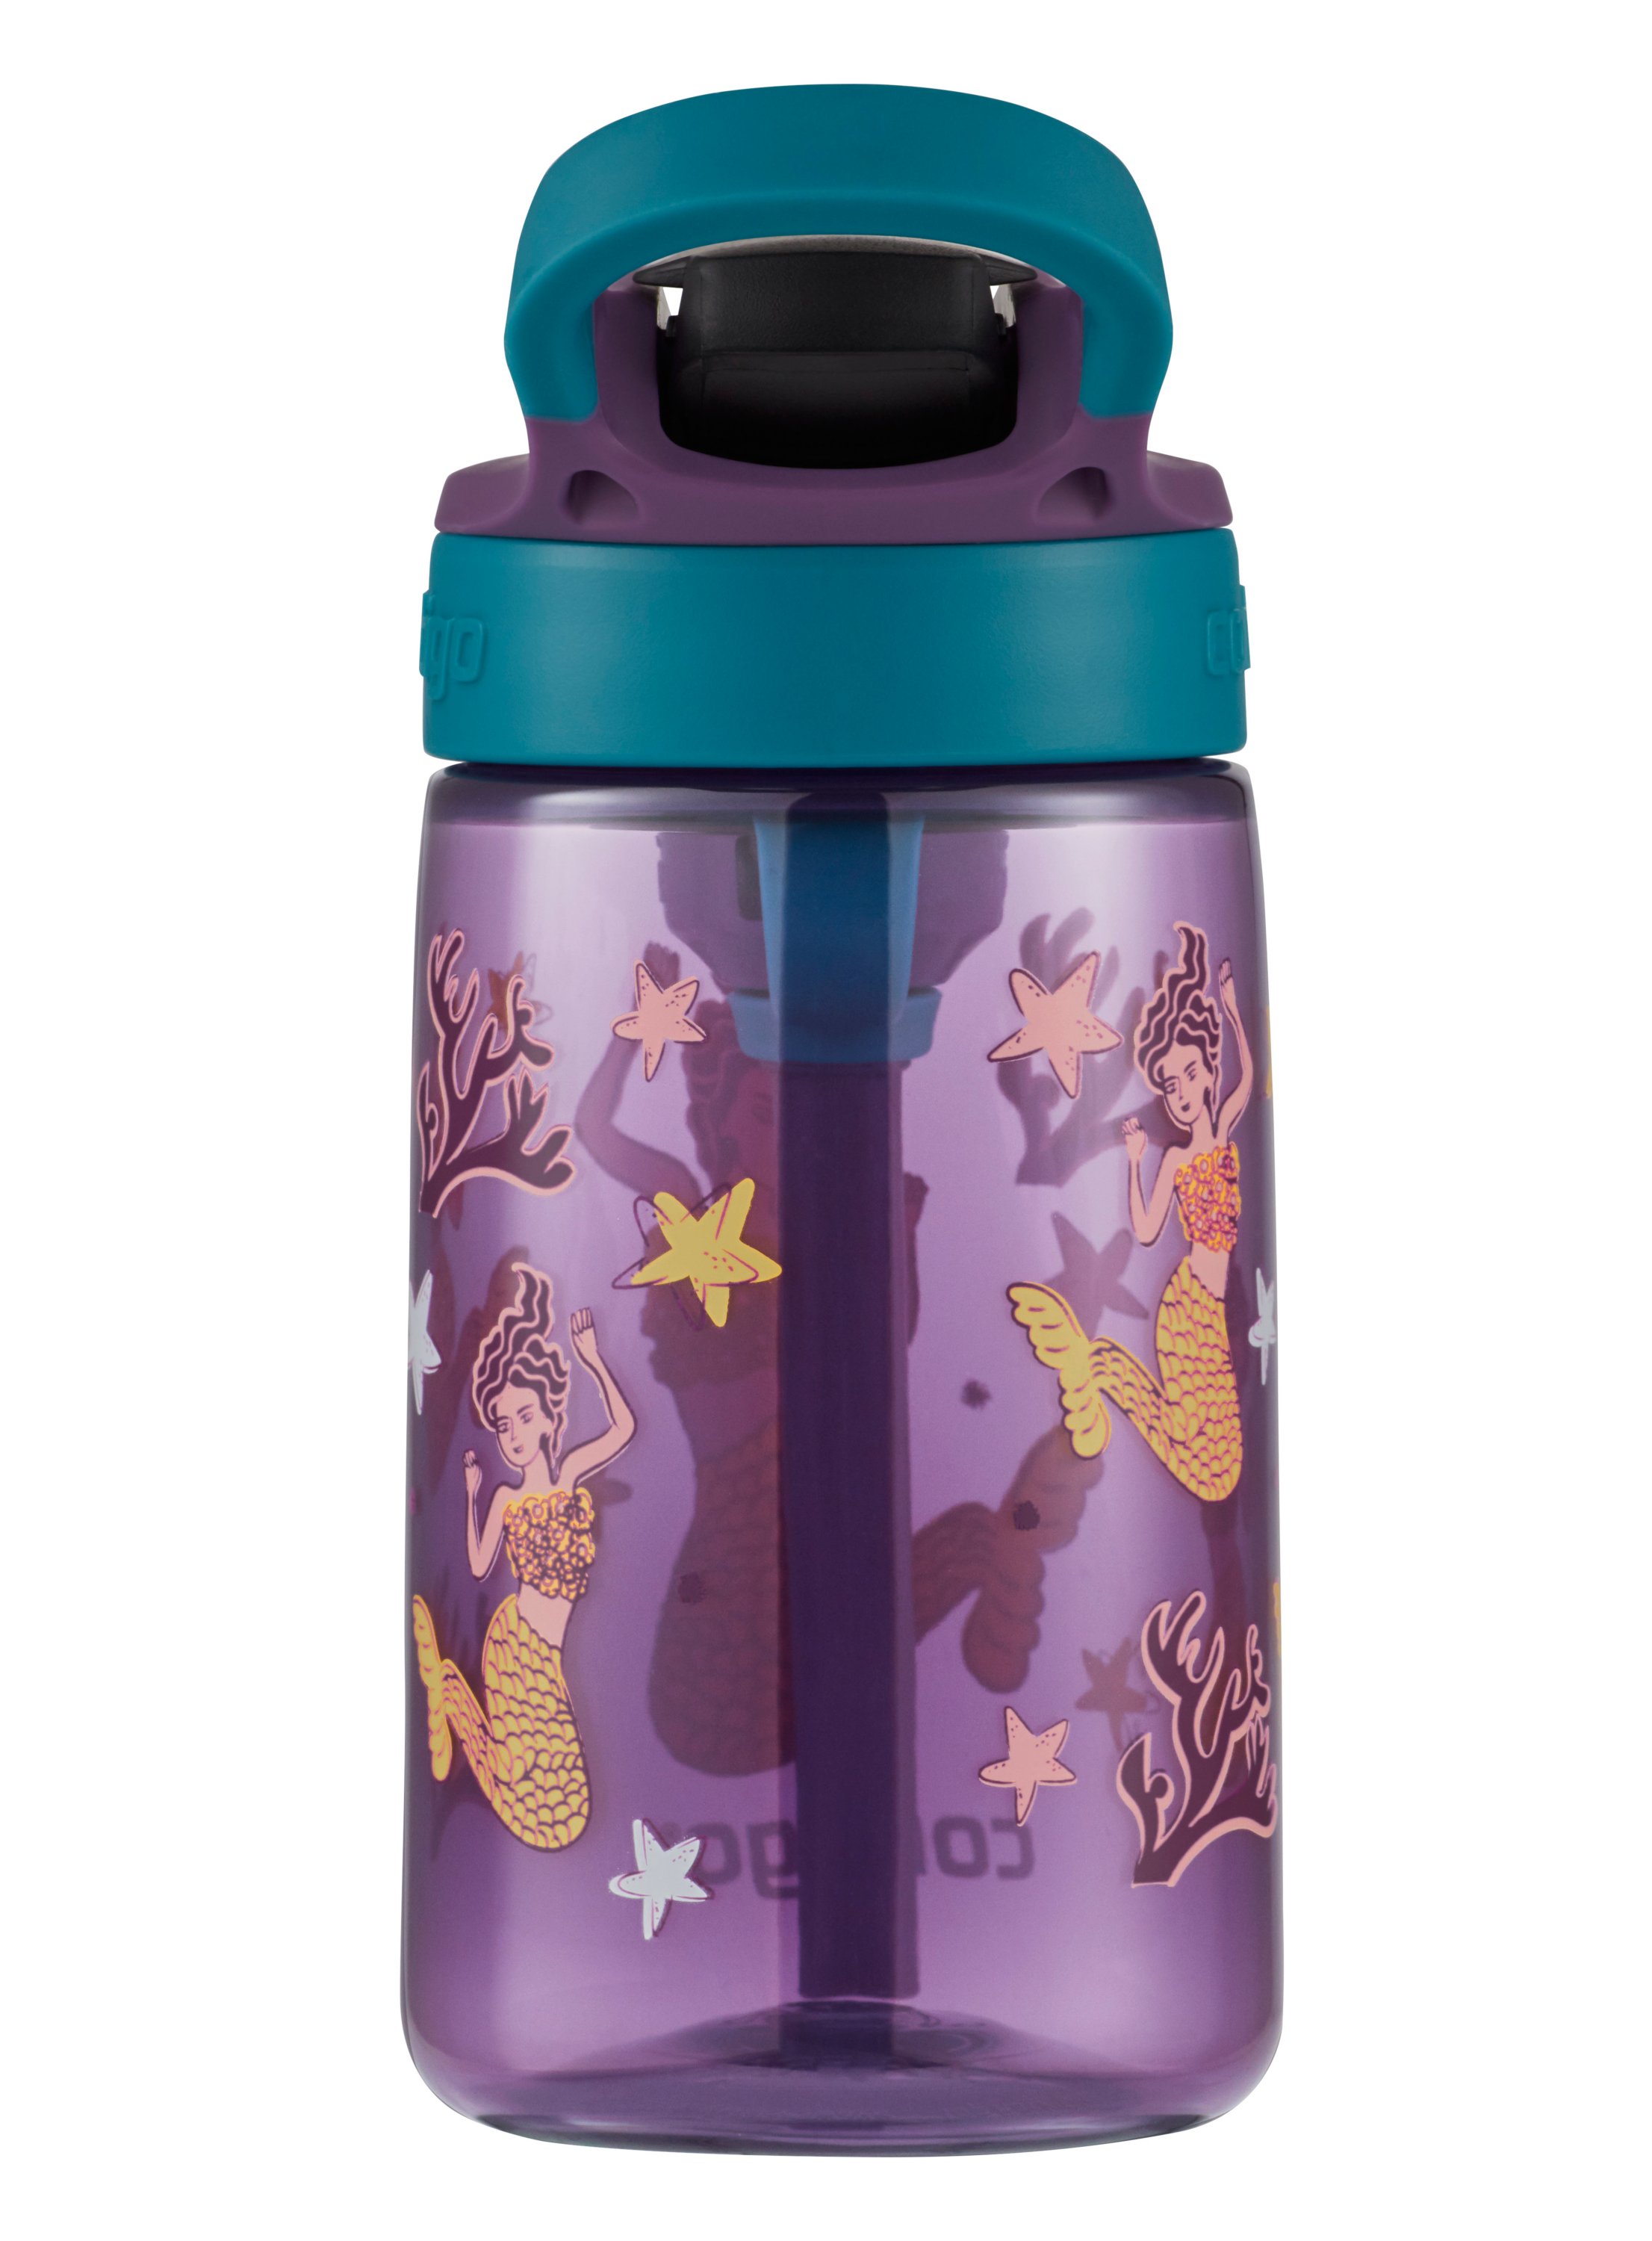 Contigo Aubrey Kids Cleanable Water Bottle with Silicone Straw and  Spill-Proof Lid, Dishwasher Safe, 14oz, Cotton Candy